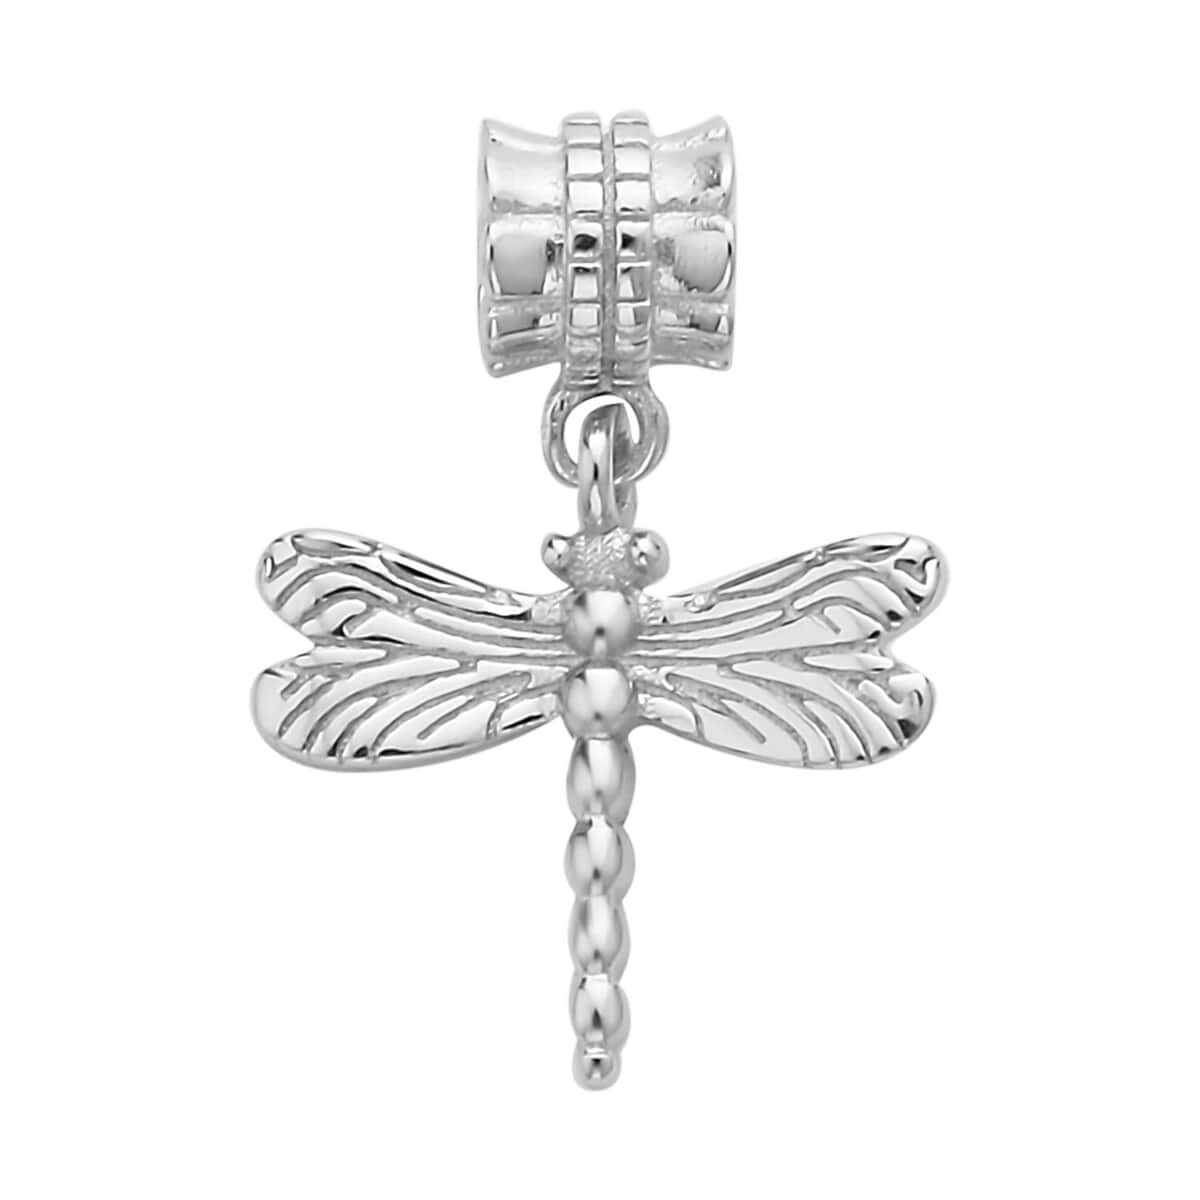 Buy Sterling Charm at ShopLC.